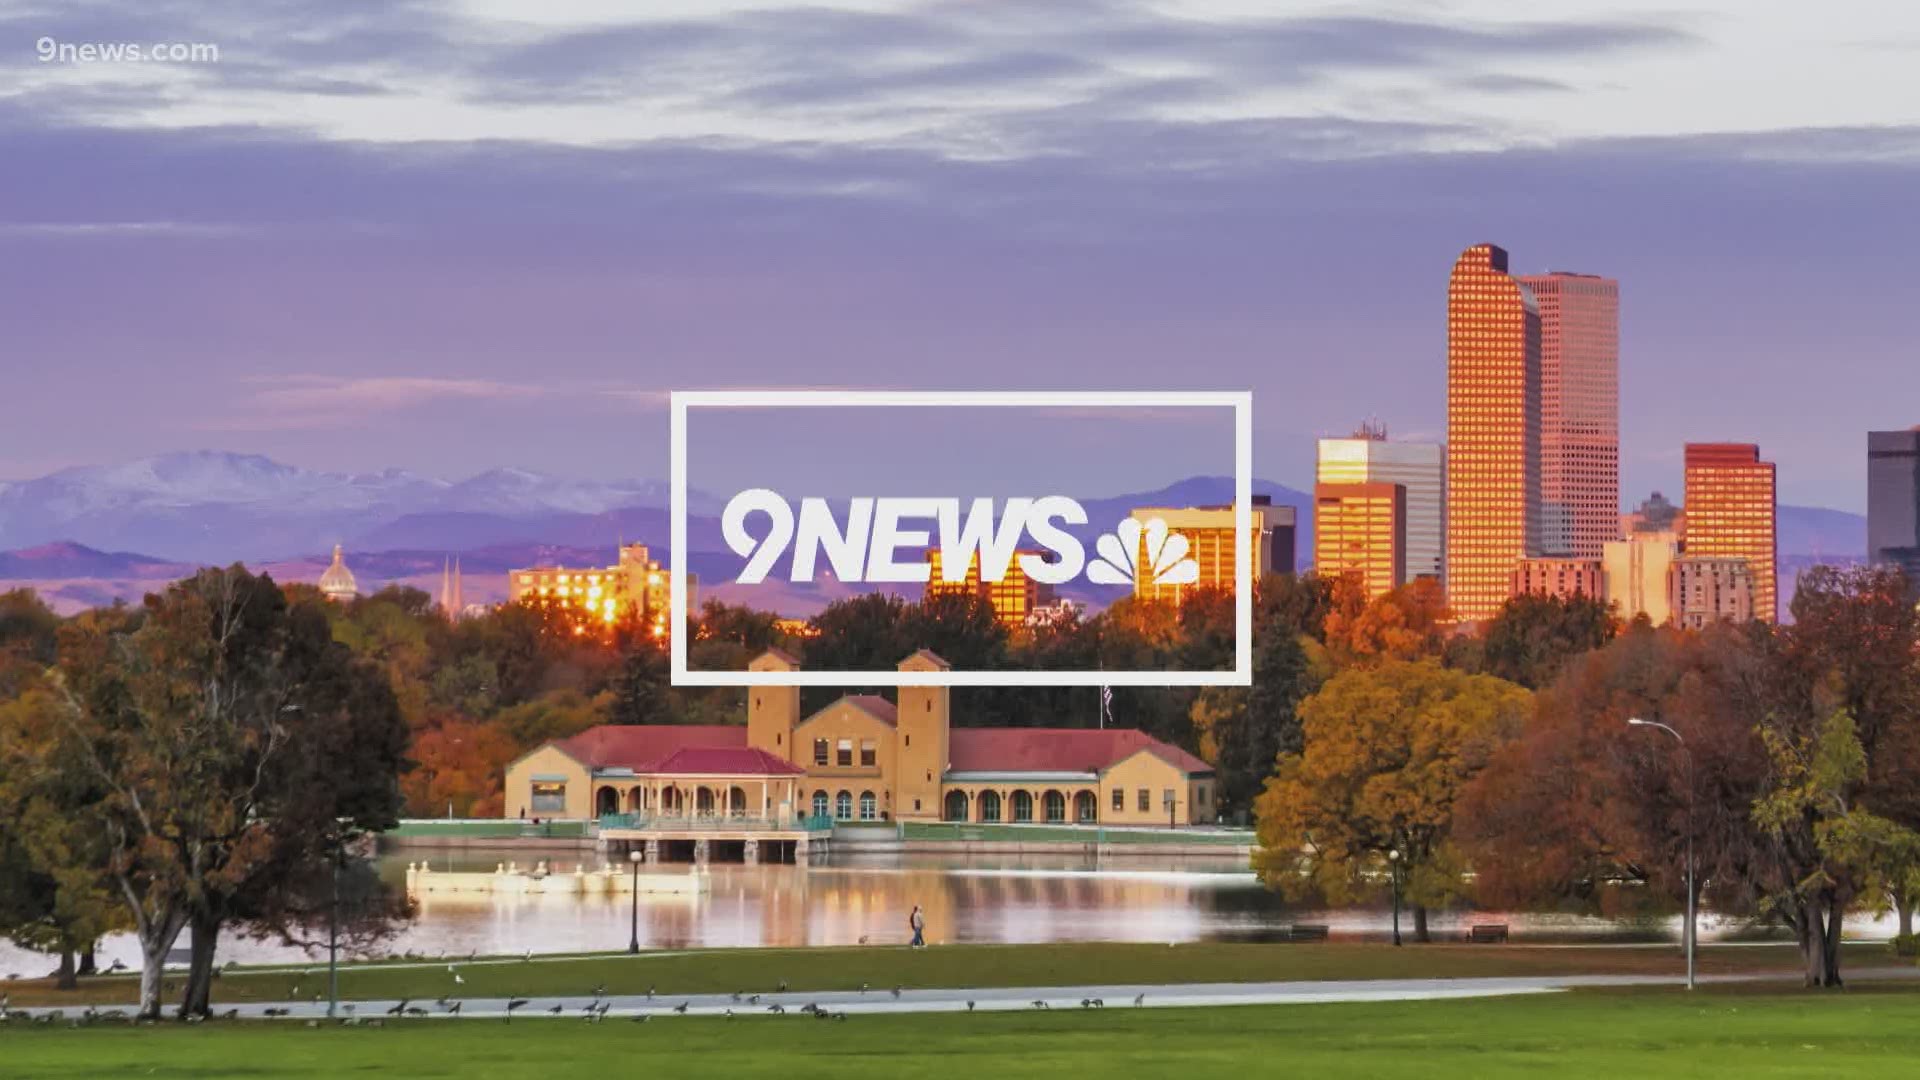 9NEWS morning headlines and weather for Thursday, April 9, 2020